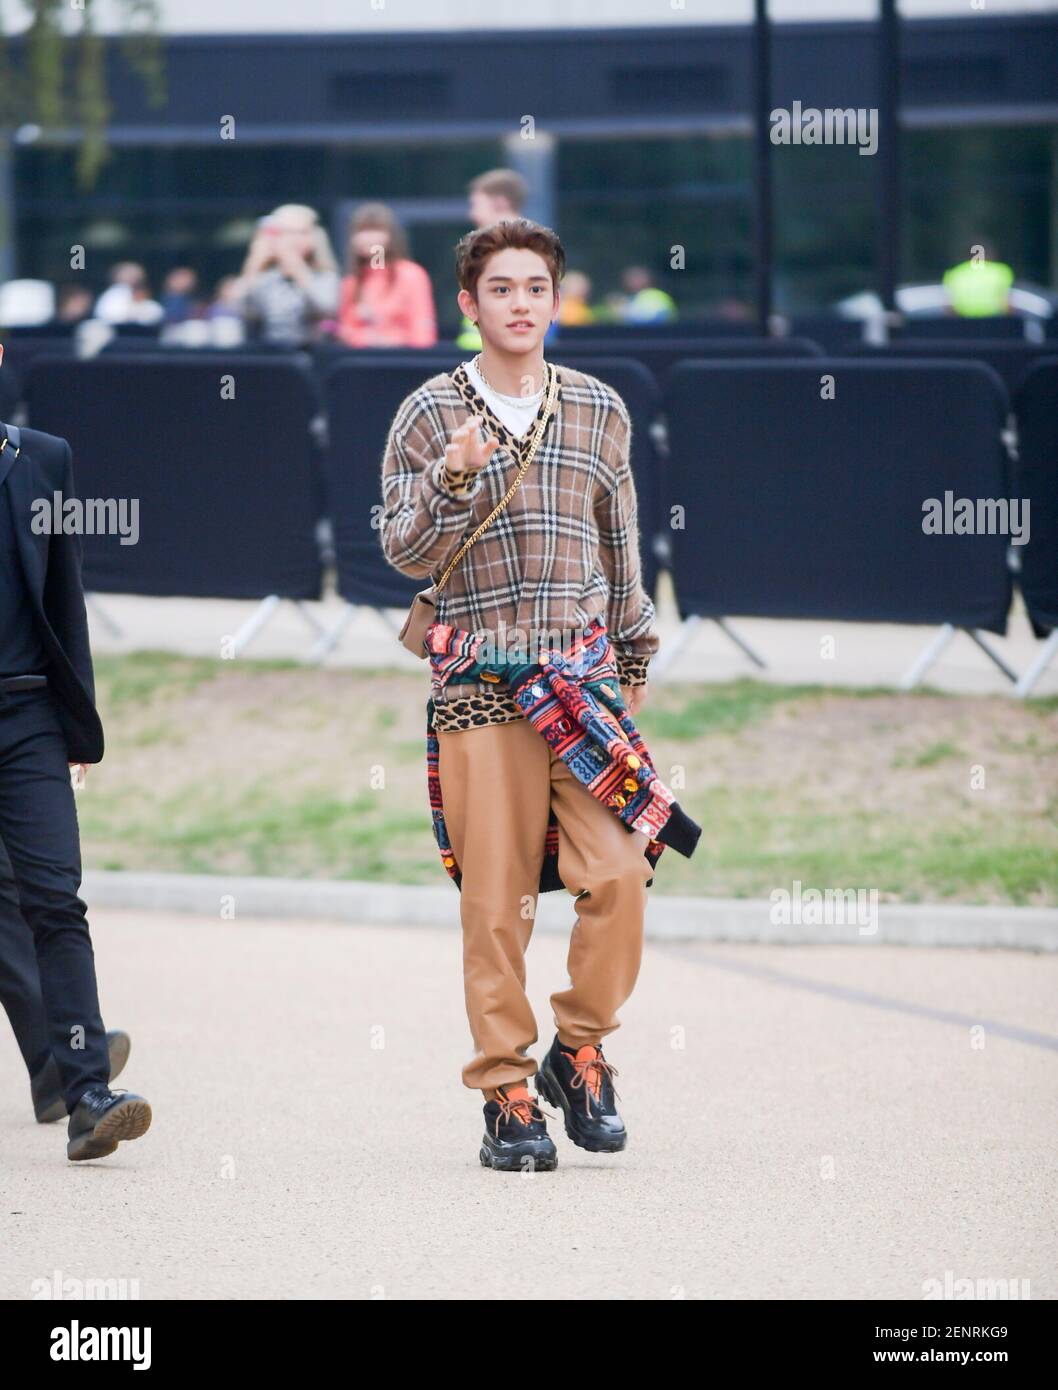 Hong Kong rapper, singer, and model Lucas Wong Yuk-hei, or Lucas Wong  attends the Burberry Show of 2020 Sping Summer London Fashion Week in  London, United Kingdom, 17 September 2019. (Photo by